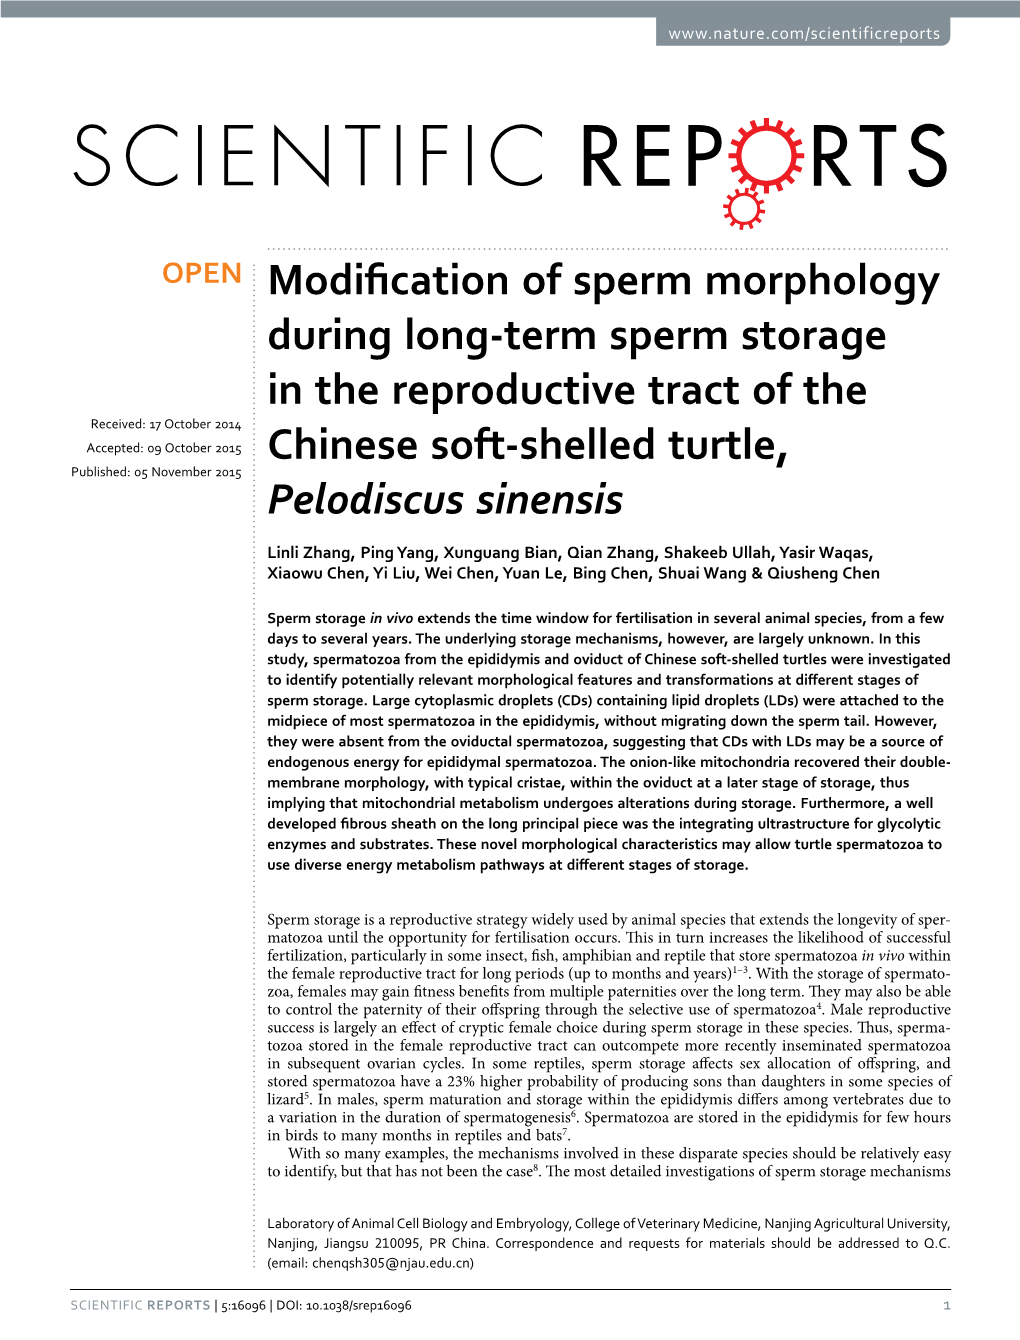 Modification of Sperm Morphology During Long-Term Sperm Storage In